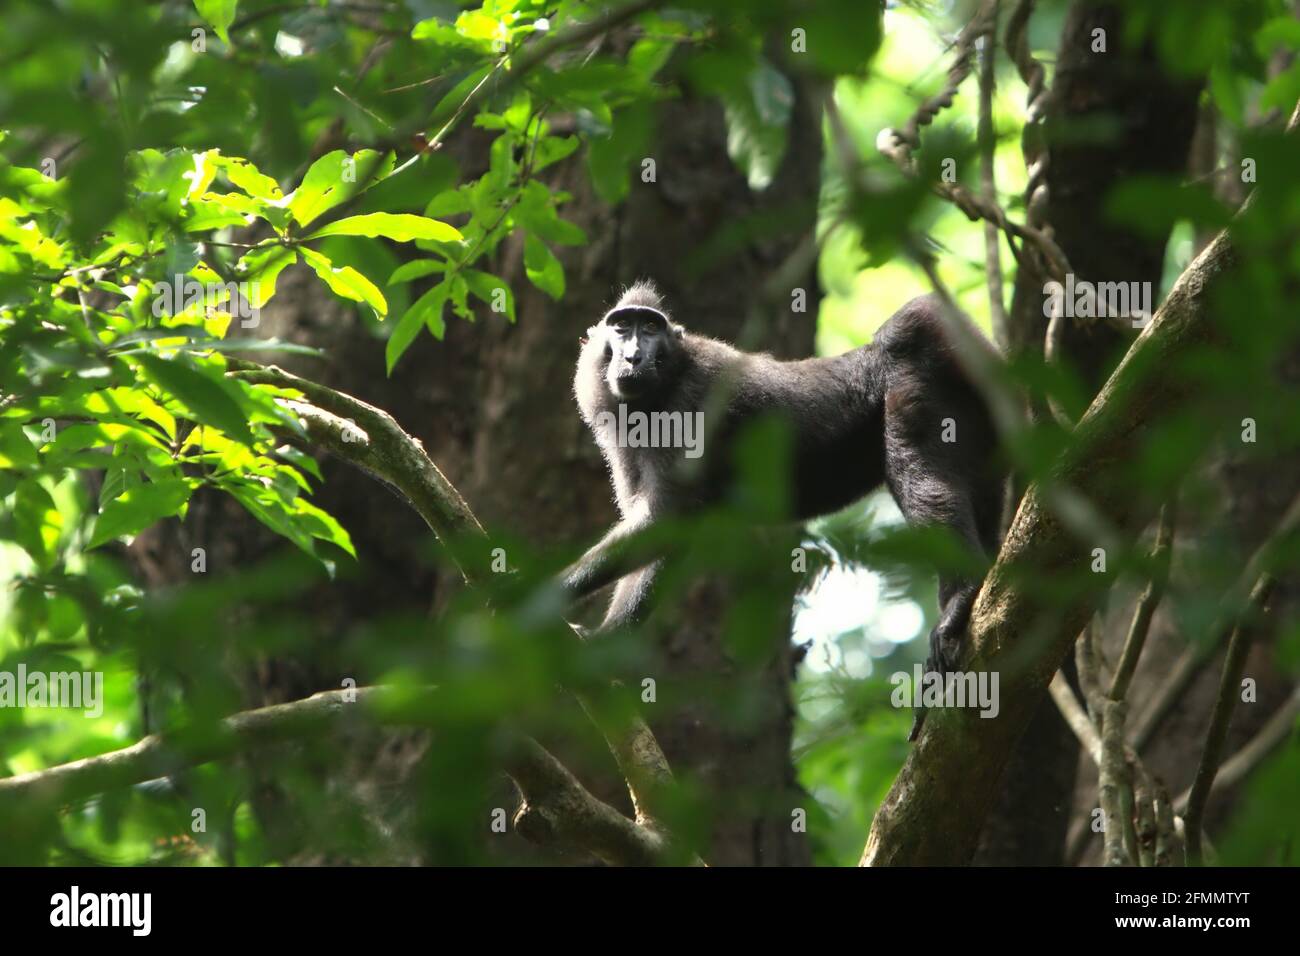 A Sulawesi black-crested macaque (Macaca nigra) is roaming on a tree in Tangkoko Nature Reserve, North Sulawesi, Indonesia. Stock Photo